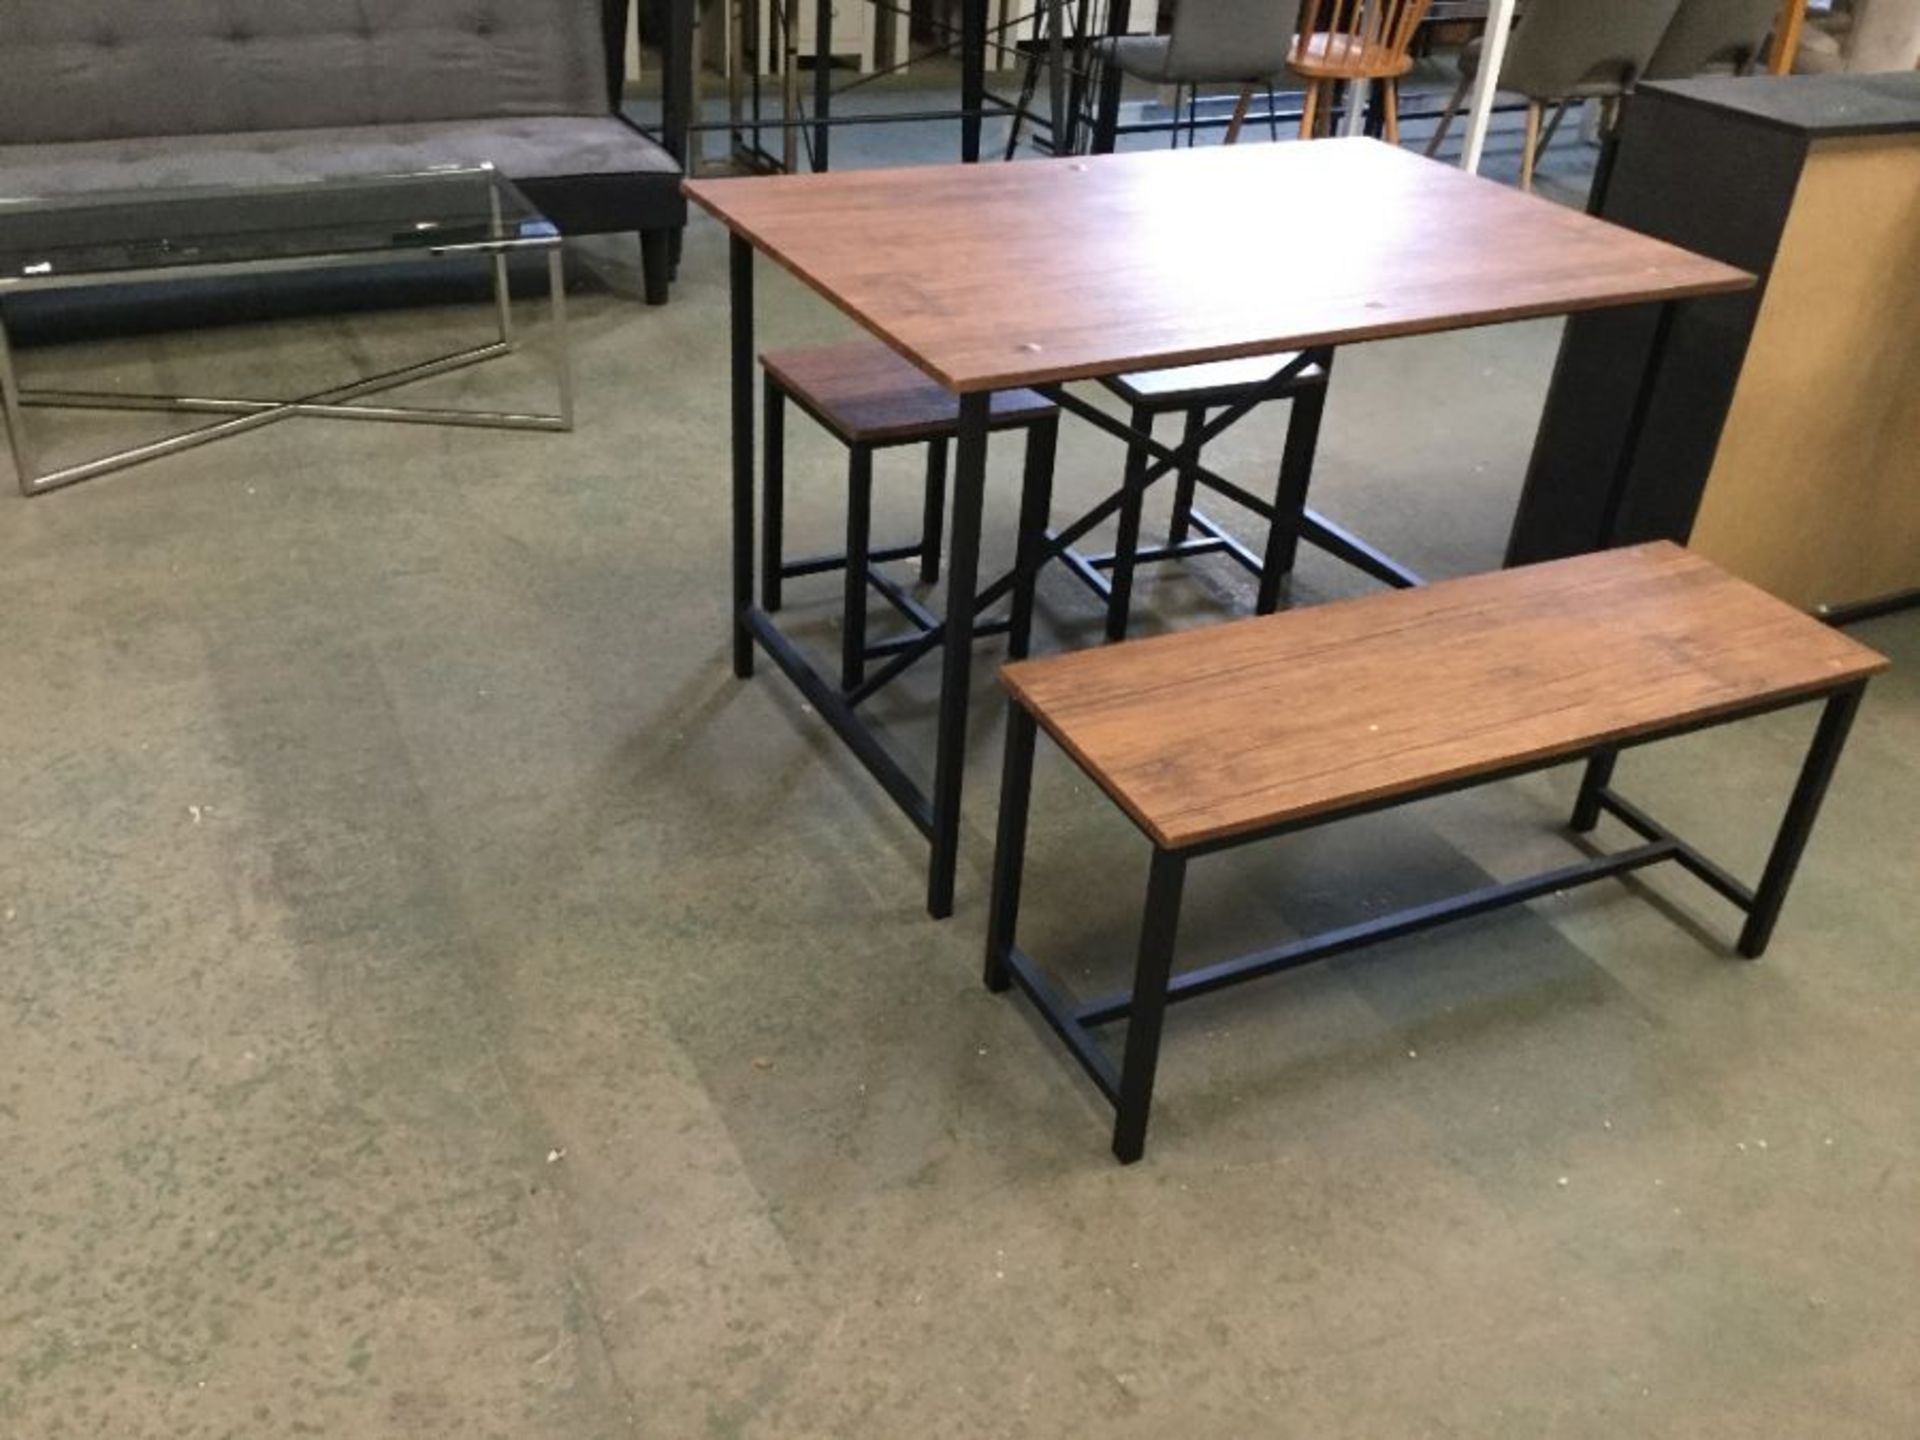 TABLE AND 2 BENCHES (DAMAGE)